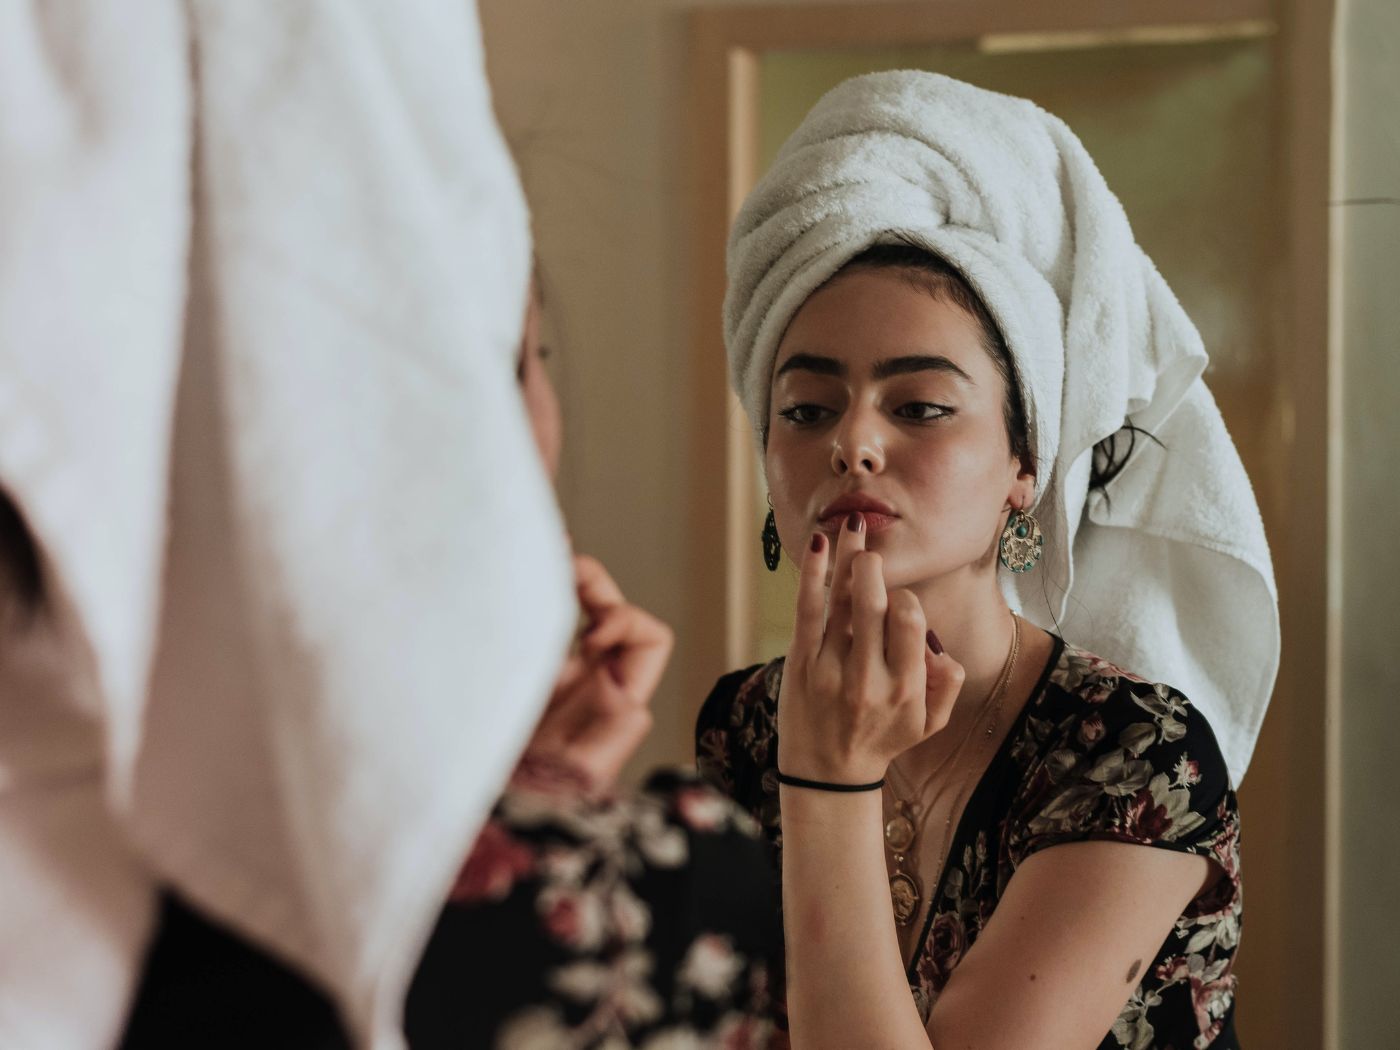 Gen z woman applying lip color in the mirror with a towel on her head